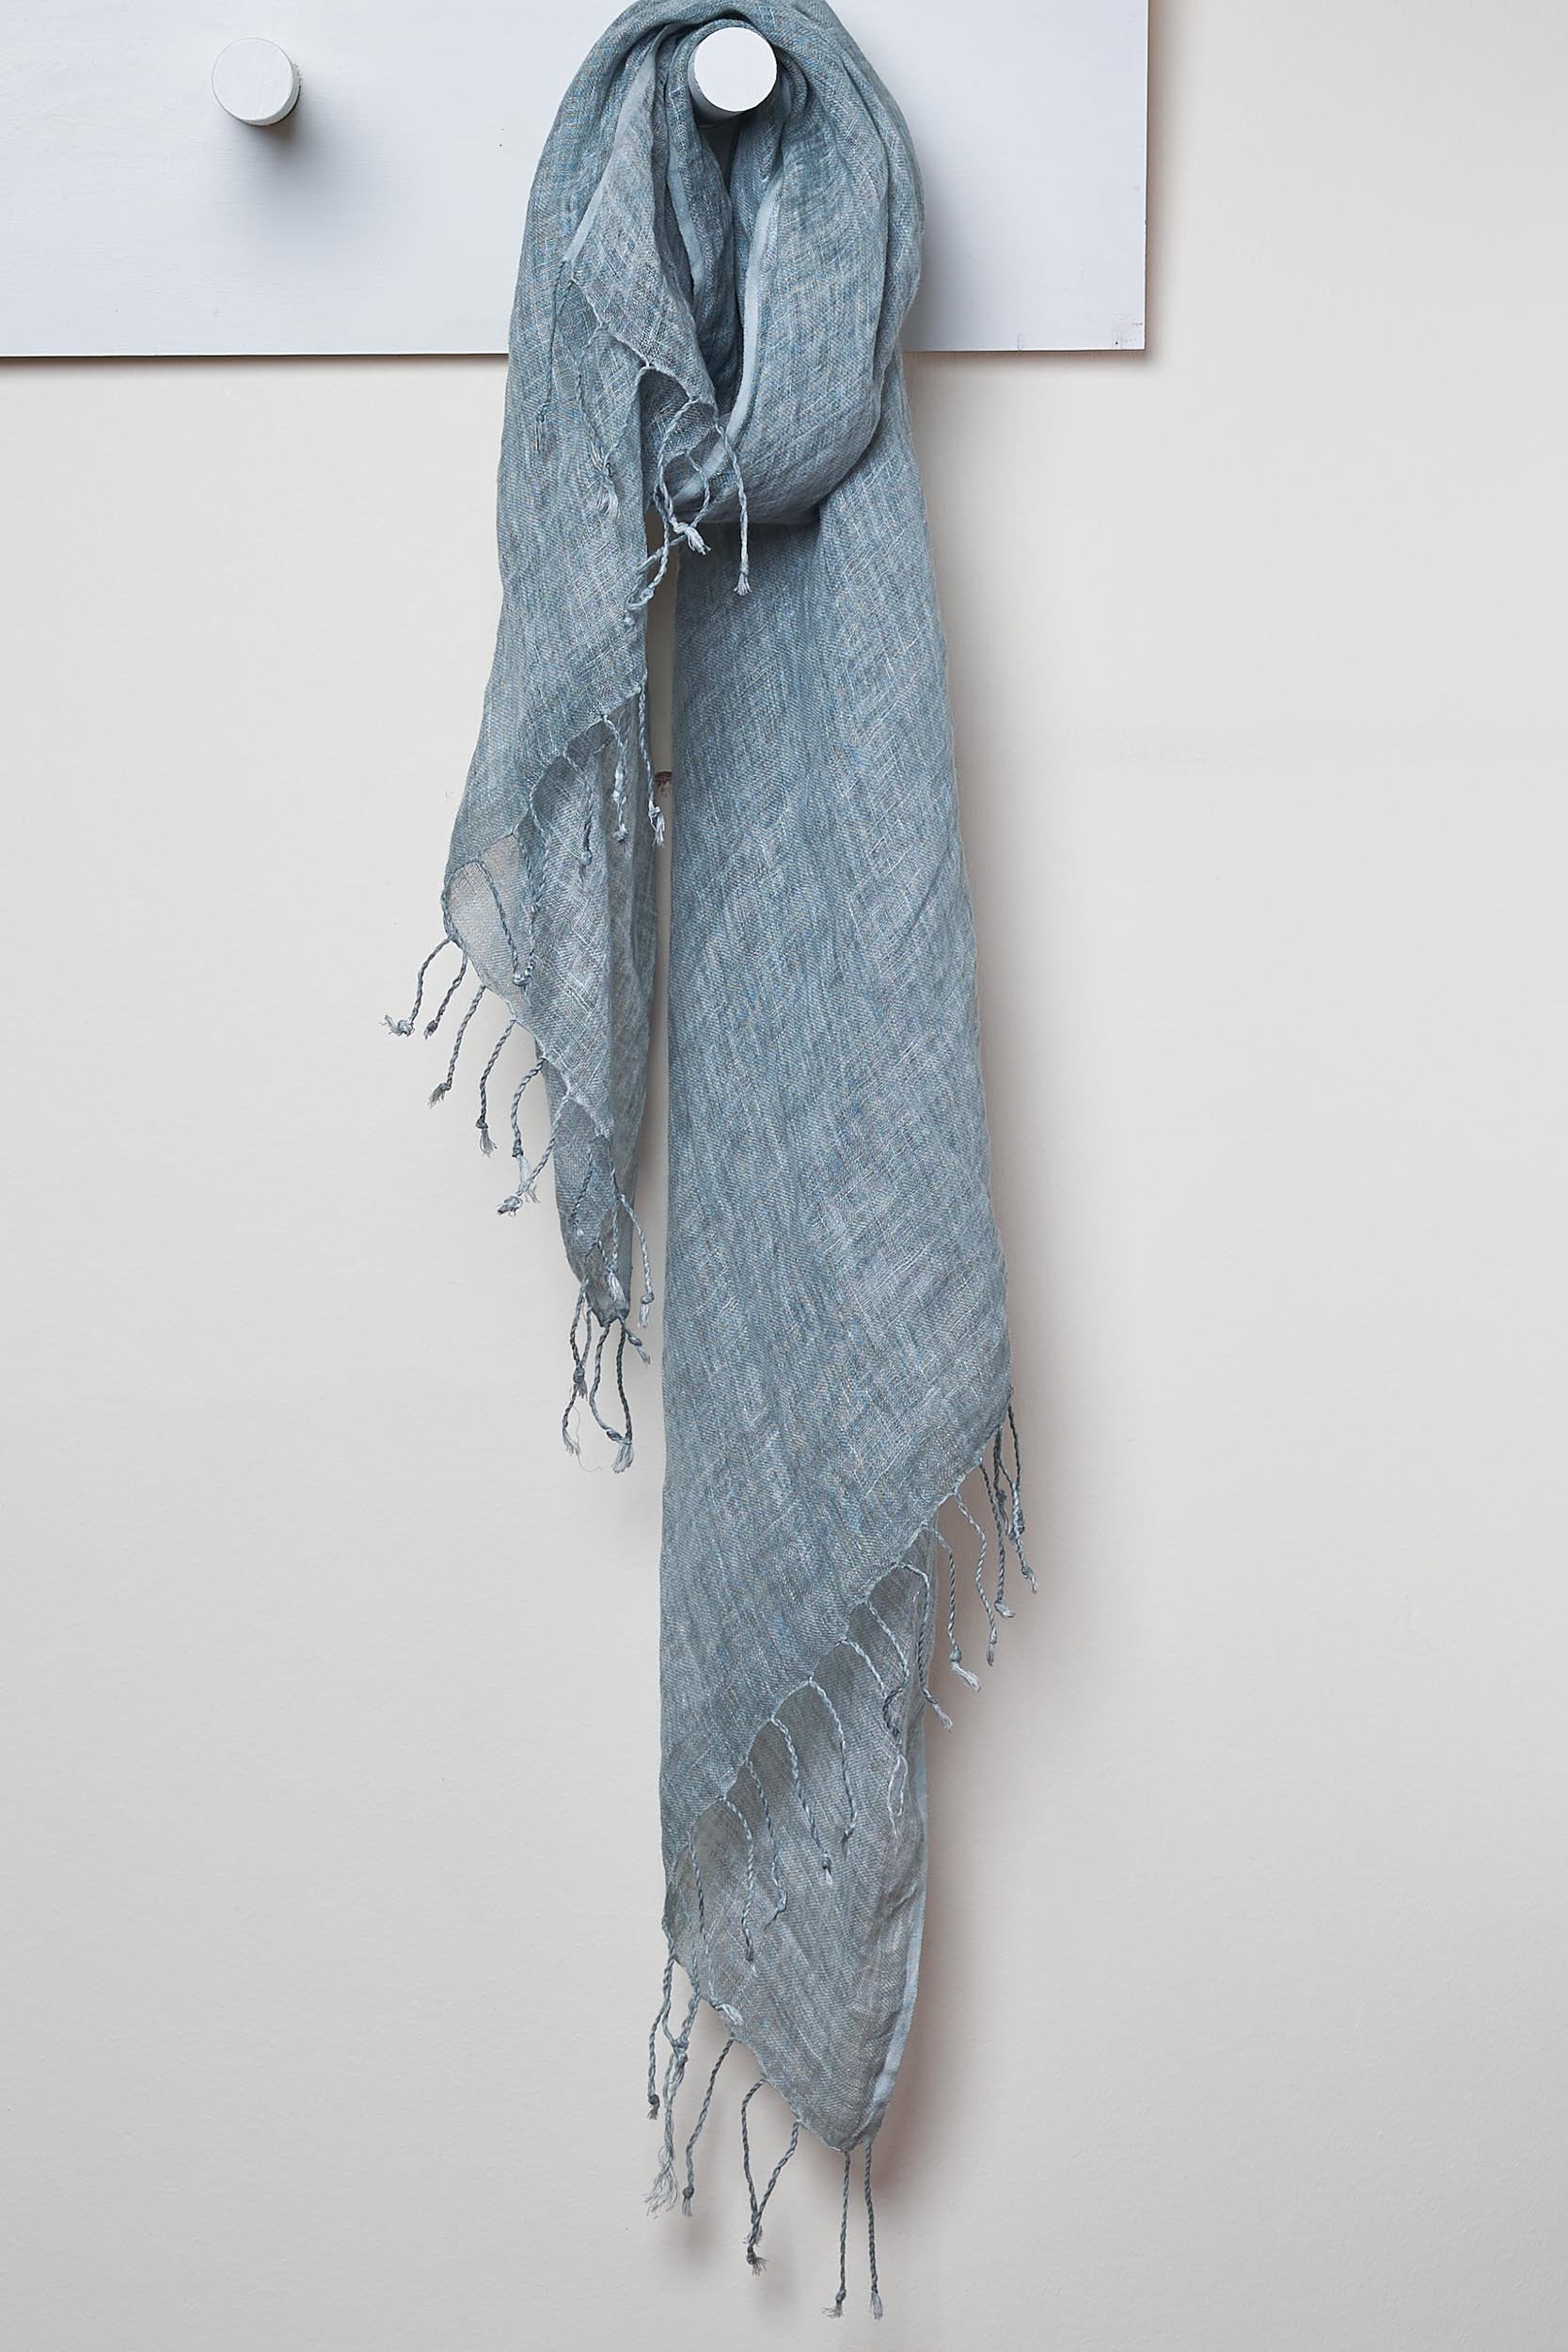 3 Visits To Cairo pure linen scarf in Titanium.  looped around a hook detailing the linen texture and thin tassels tied at the short edges of the scarf.